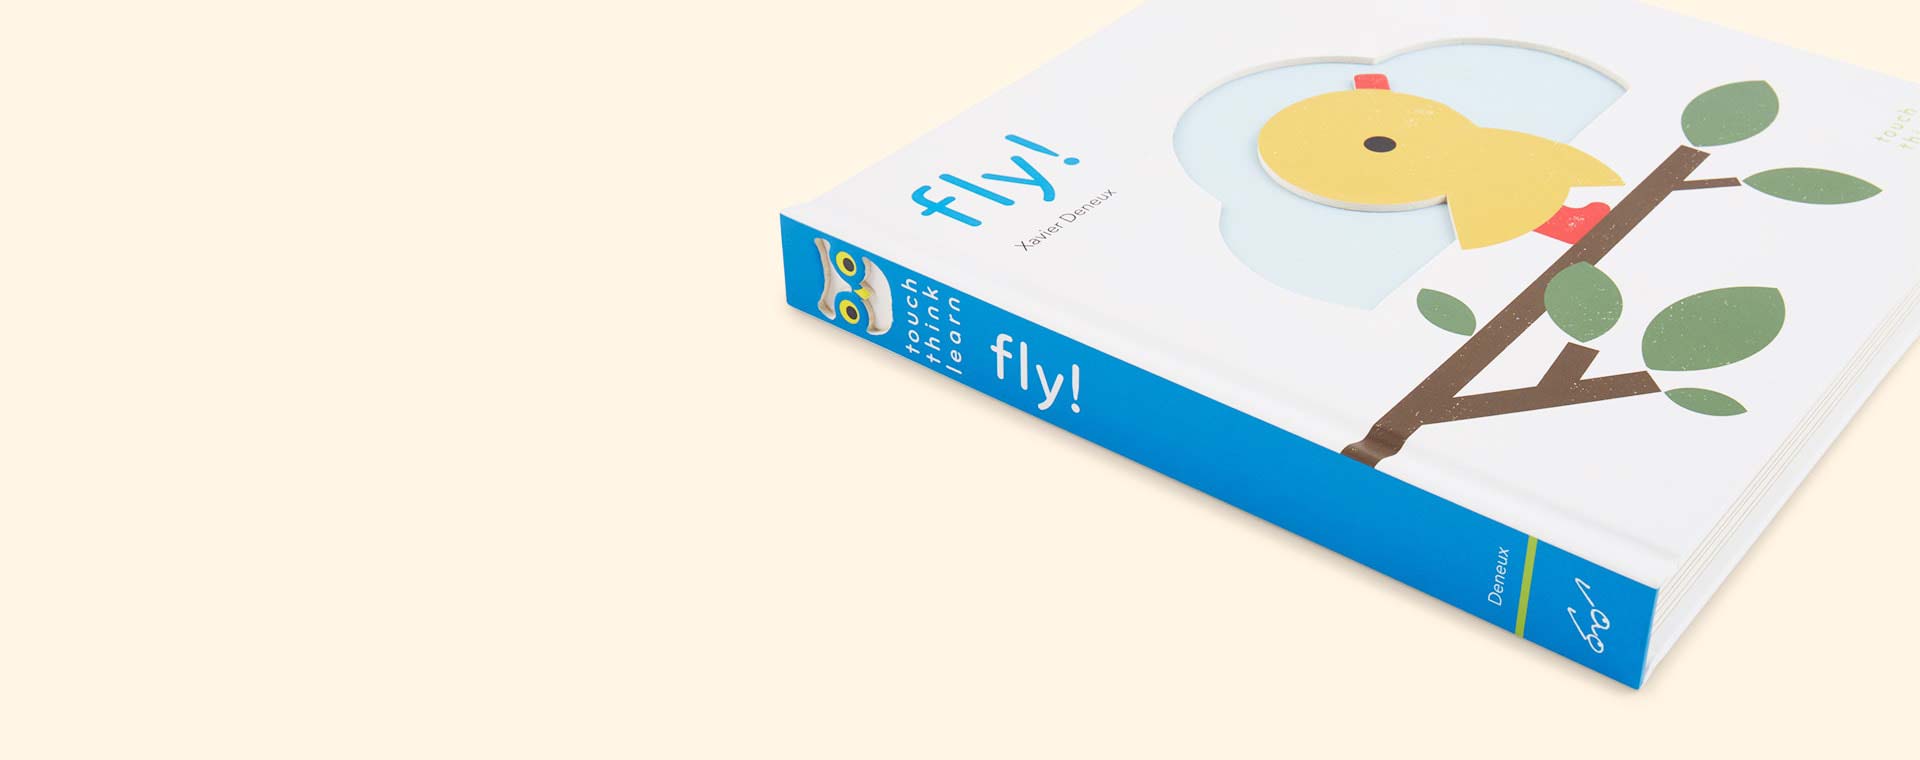 Multi Abrams & Chronicle Books Touch Think Learn: Fly